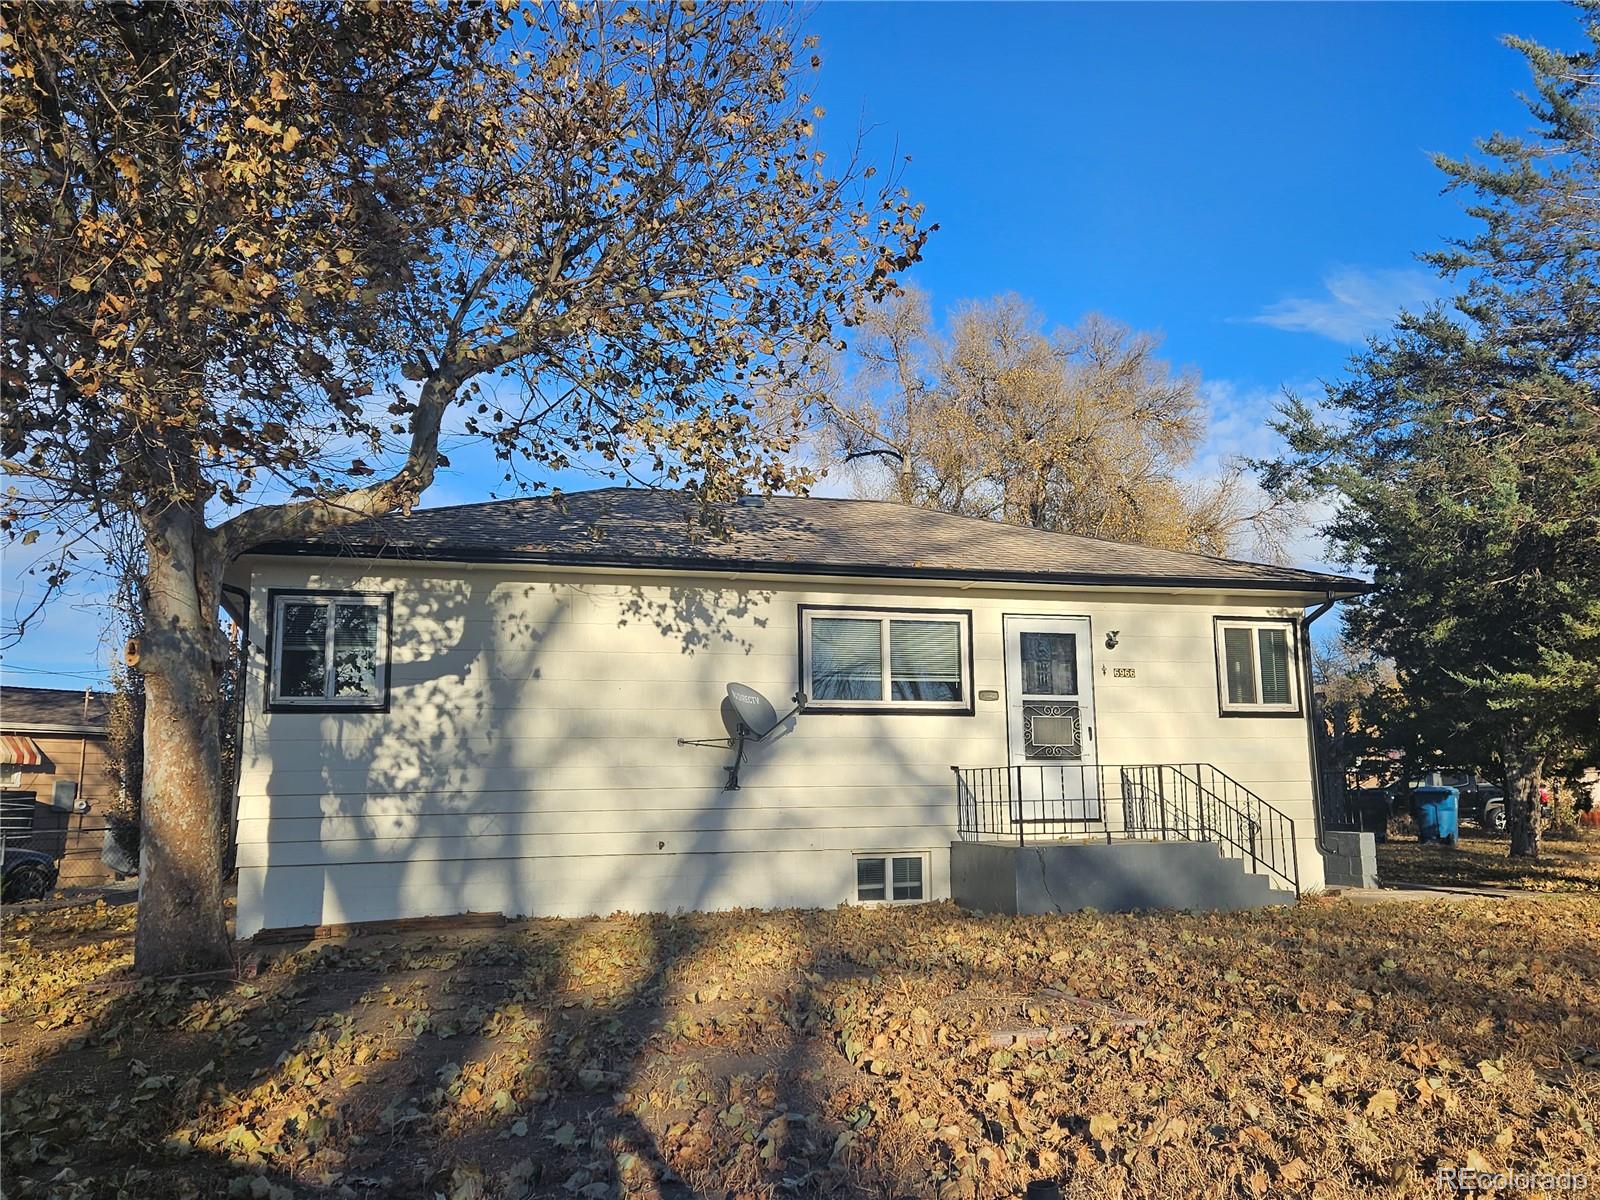 6966  garden court, commerce city sold home. Closed on 2024-01-18 for $400,000.